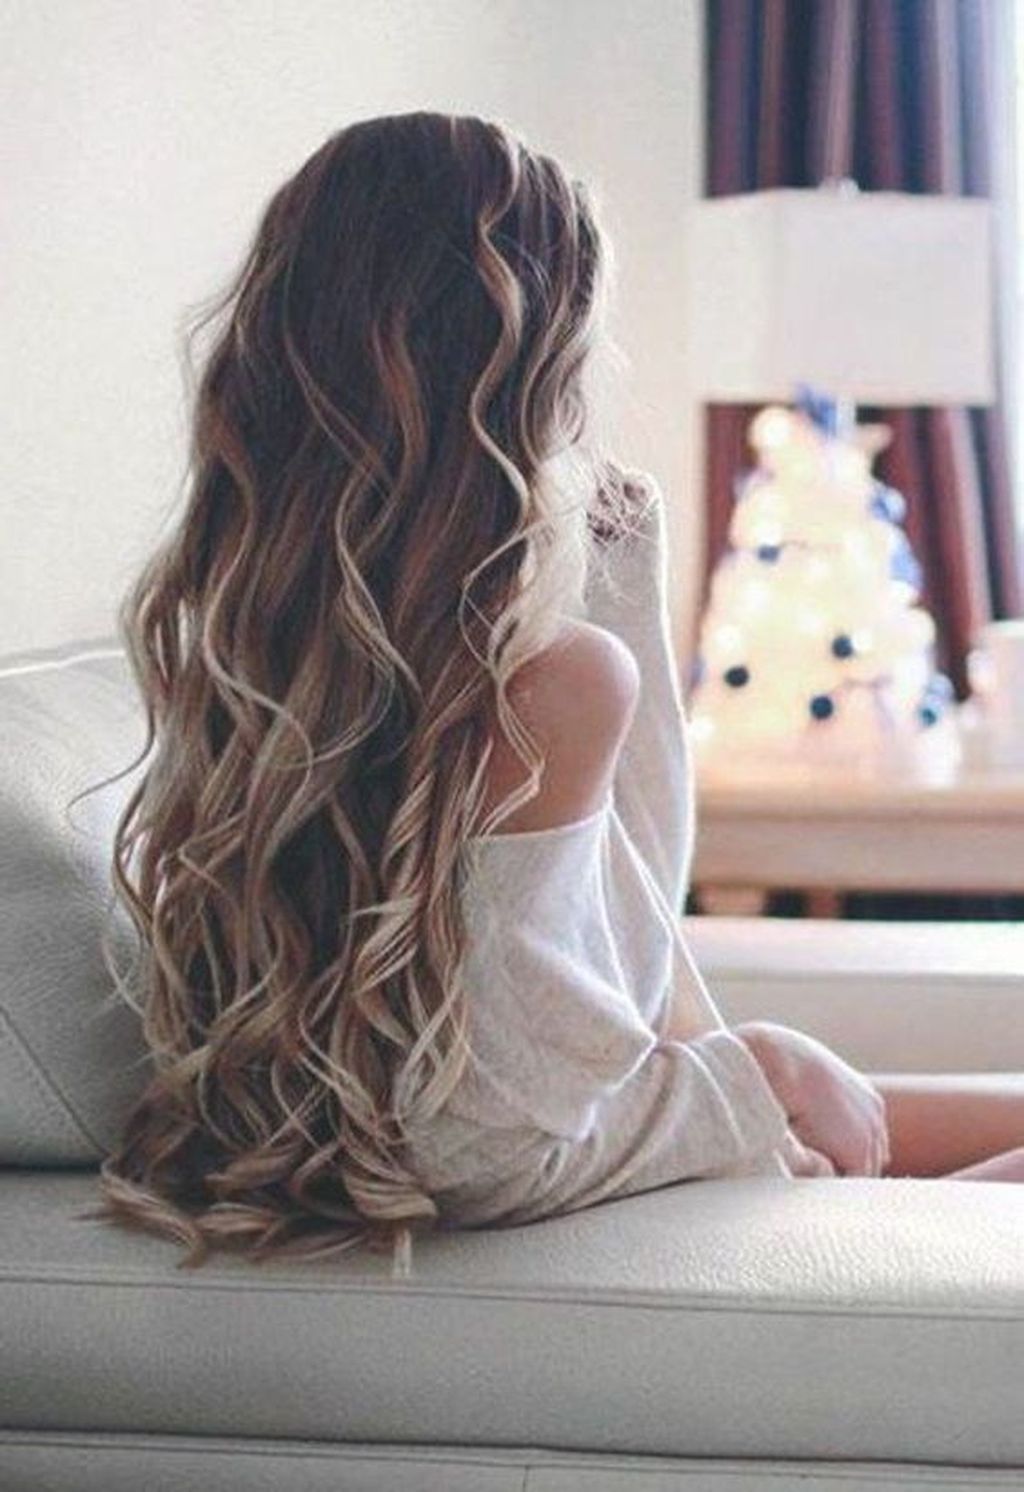 20+ Pretty Wavy Hairstyles Ideas For Women Only -   17 hairstyles Femme boucle ideas